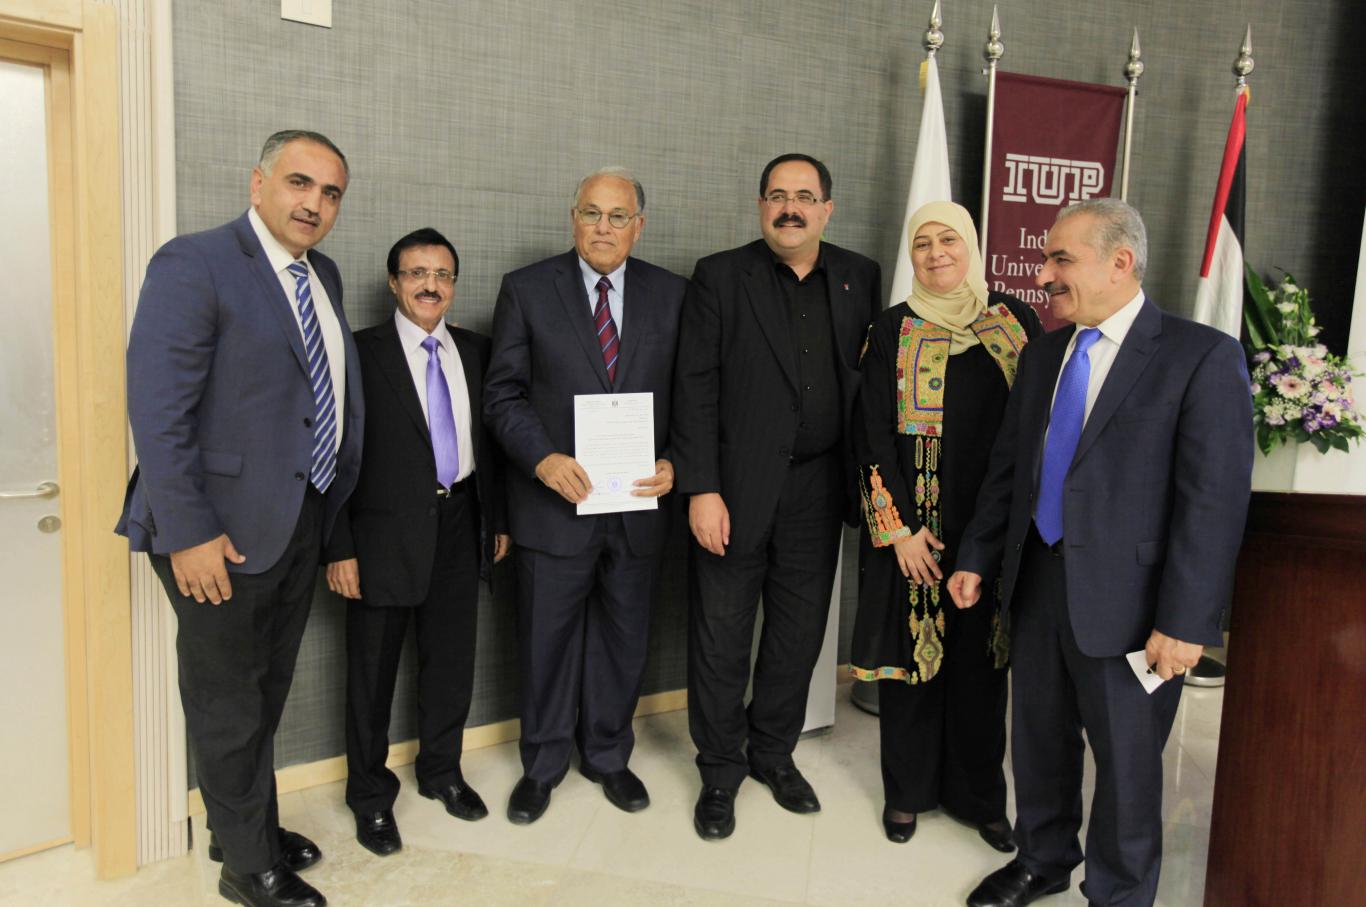 Minister of Education and Higher Education Dr. Sabri Mamdouh Saidam, announcing that the Arab American University got accreditation of the first Business Administration PhD program in Palestine